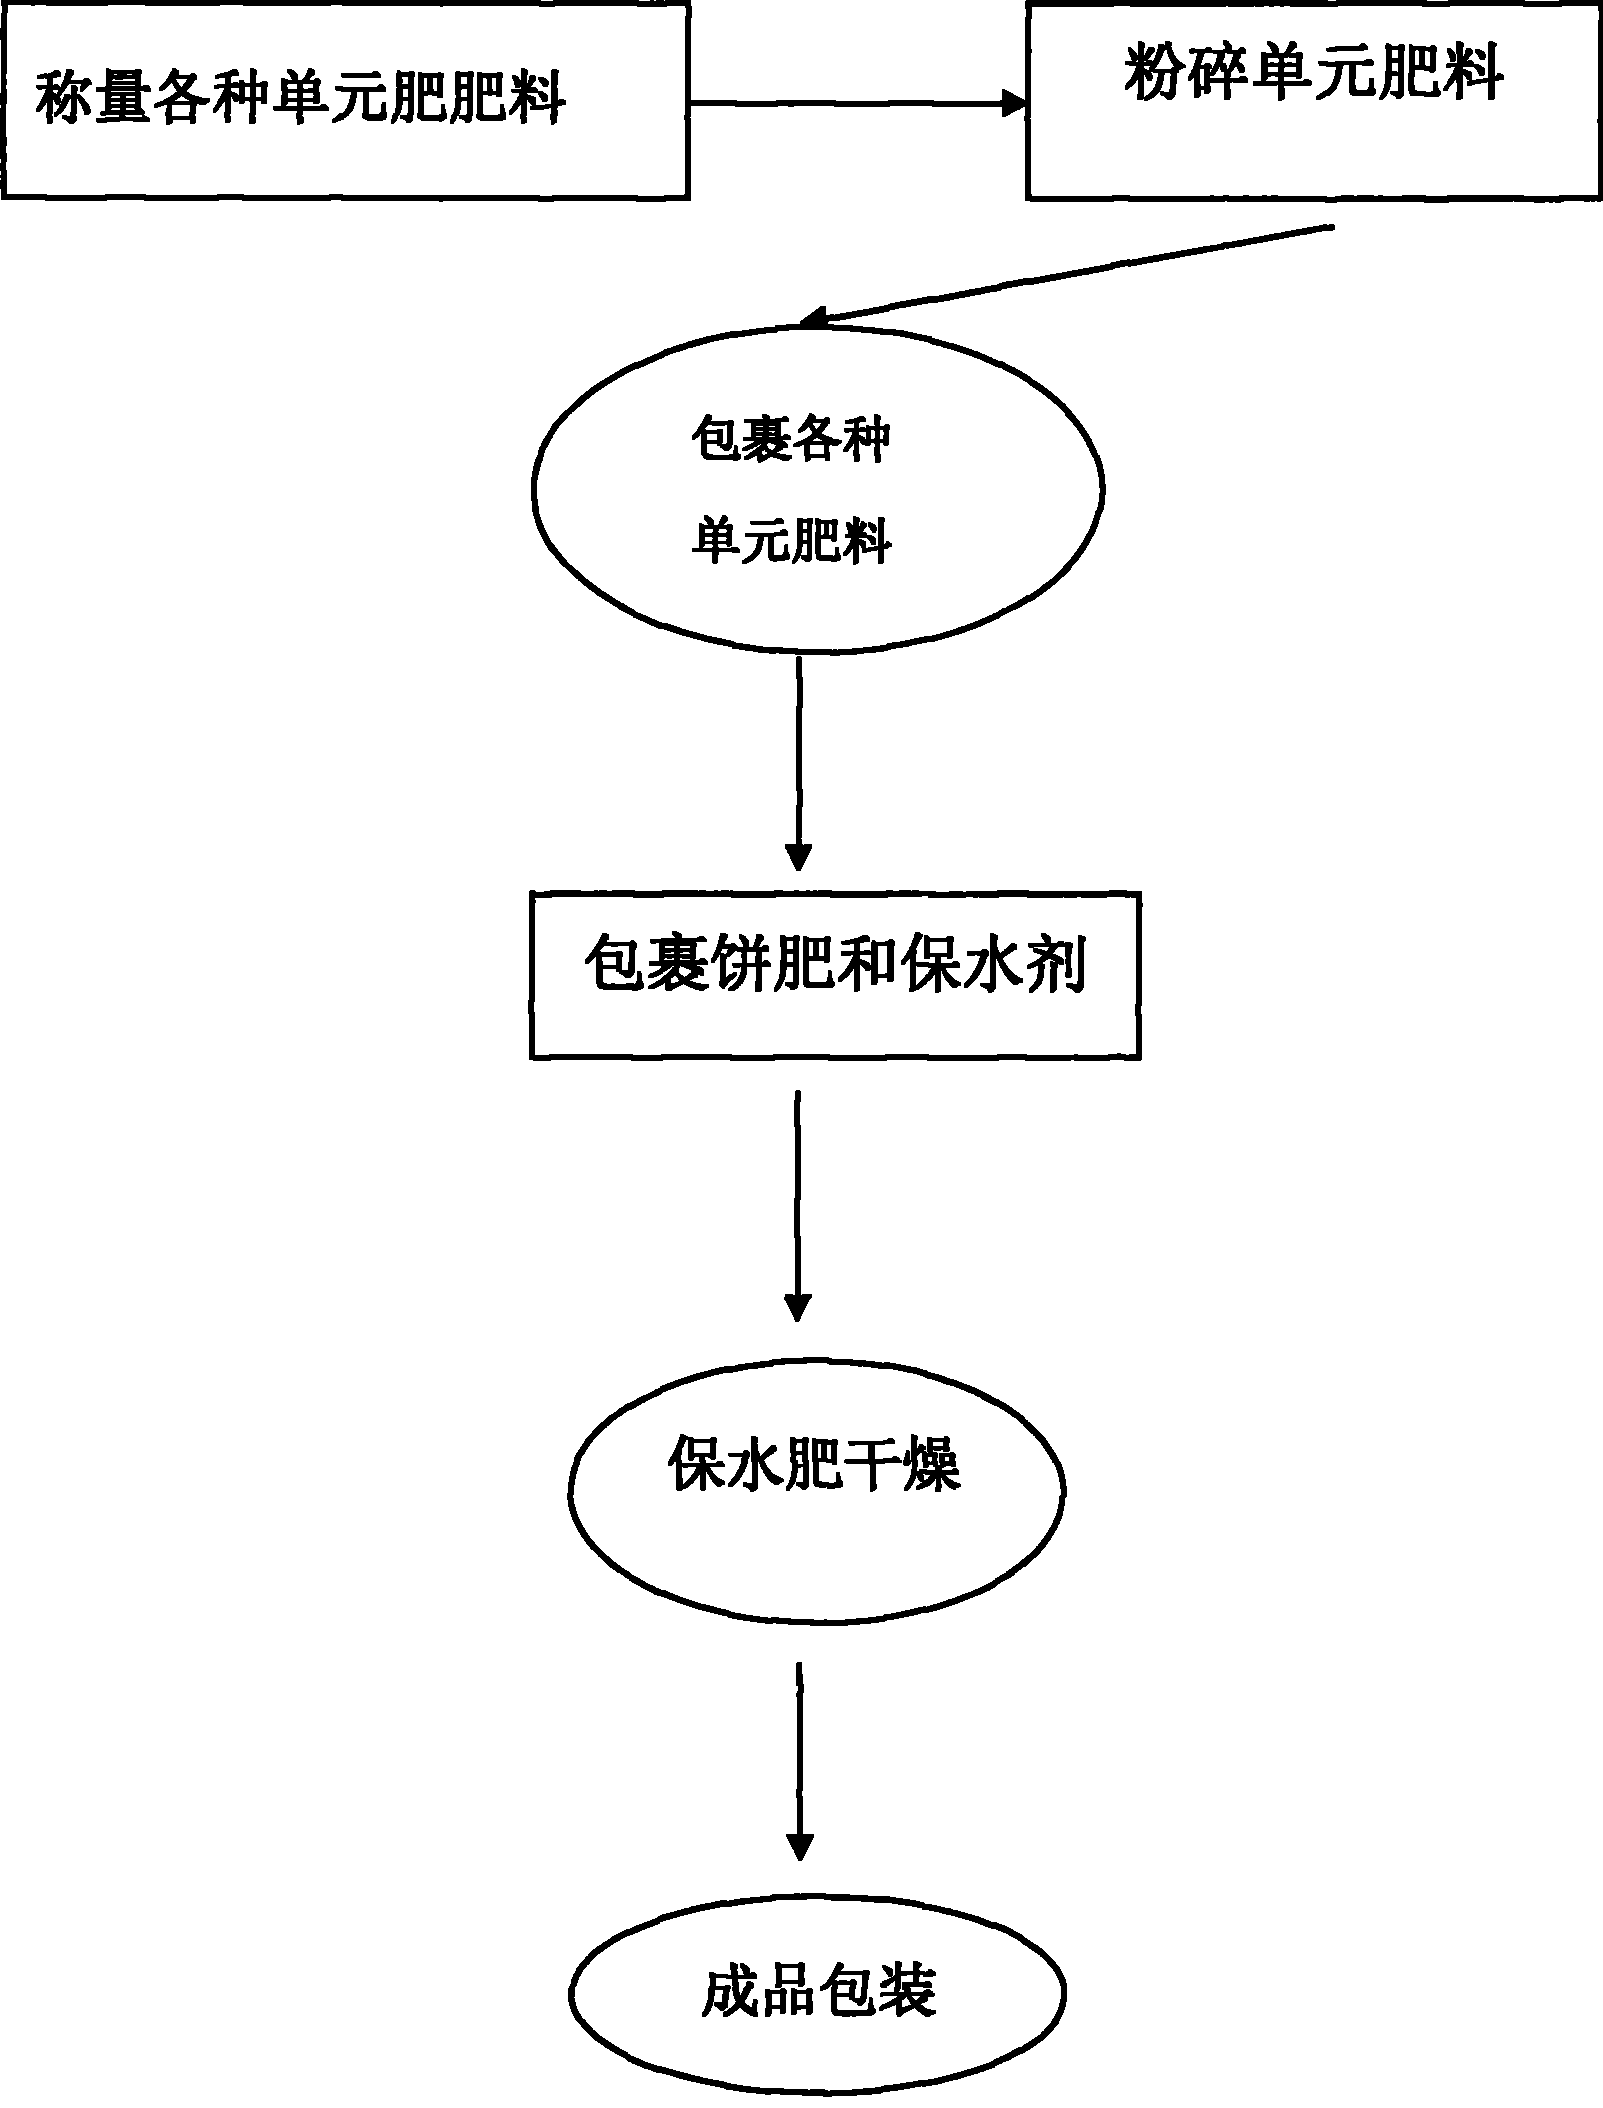 Water holding controlled release fertilizer special for tobacco and method for producing the same